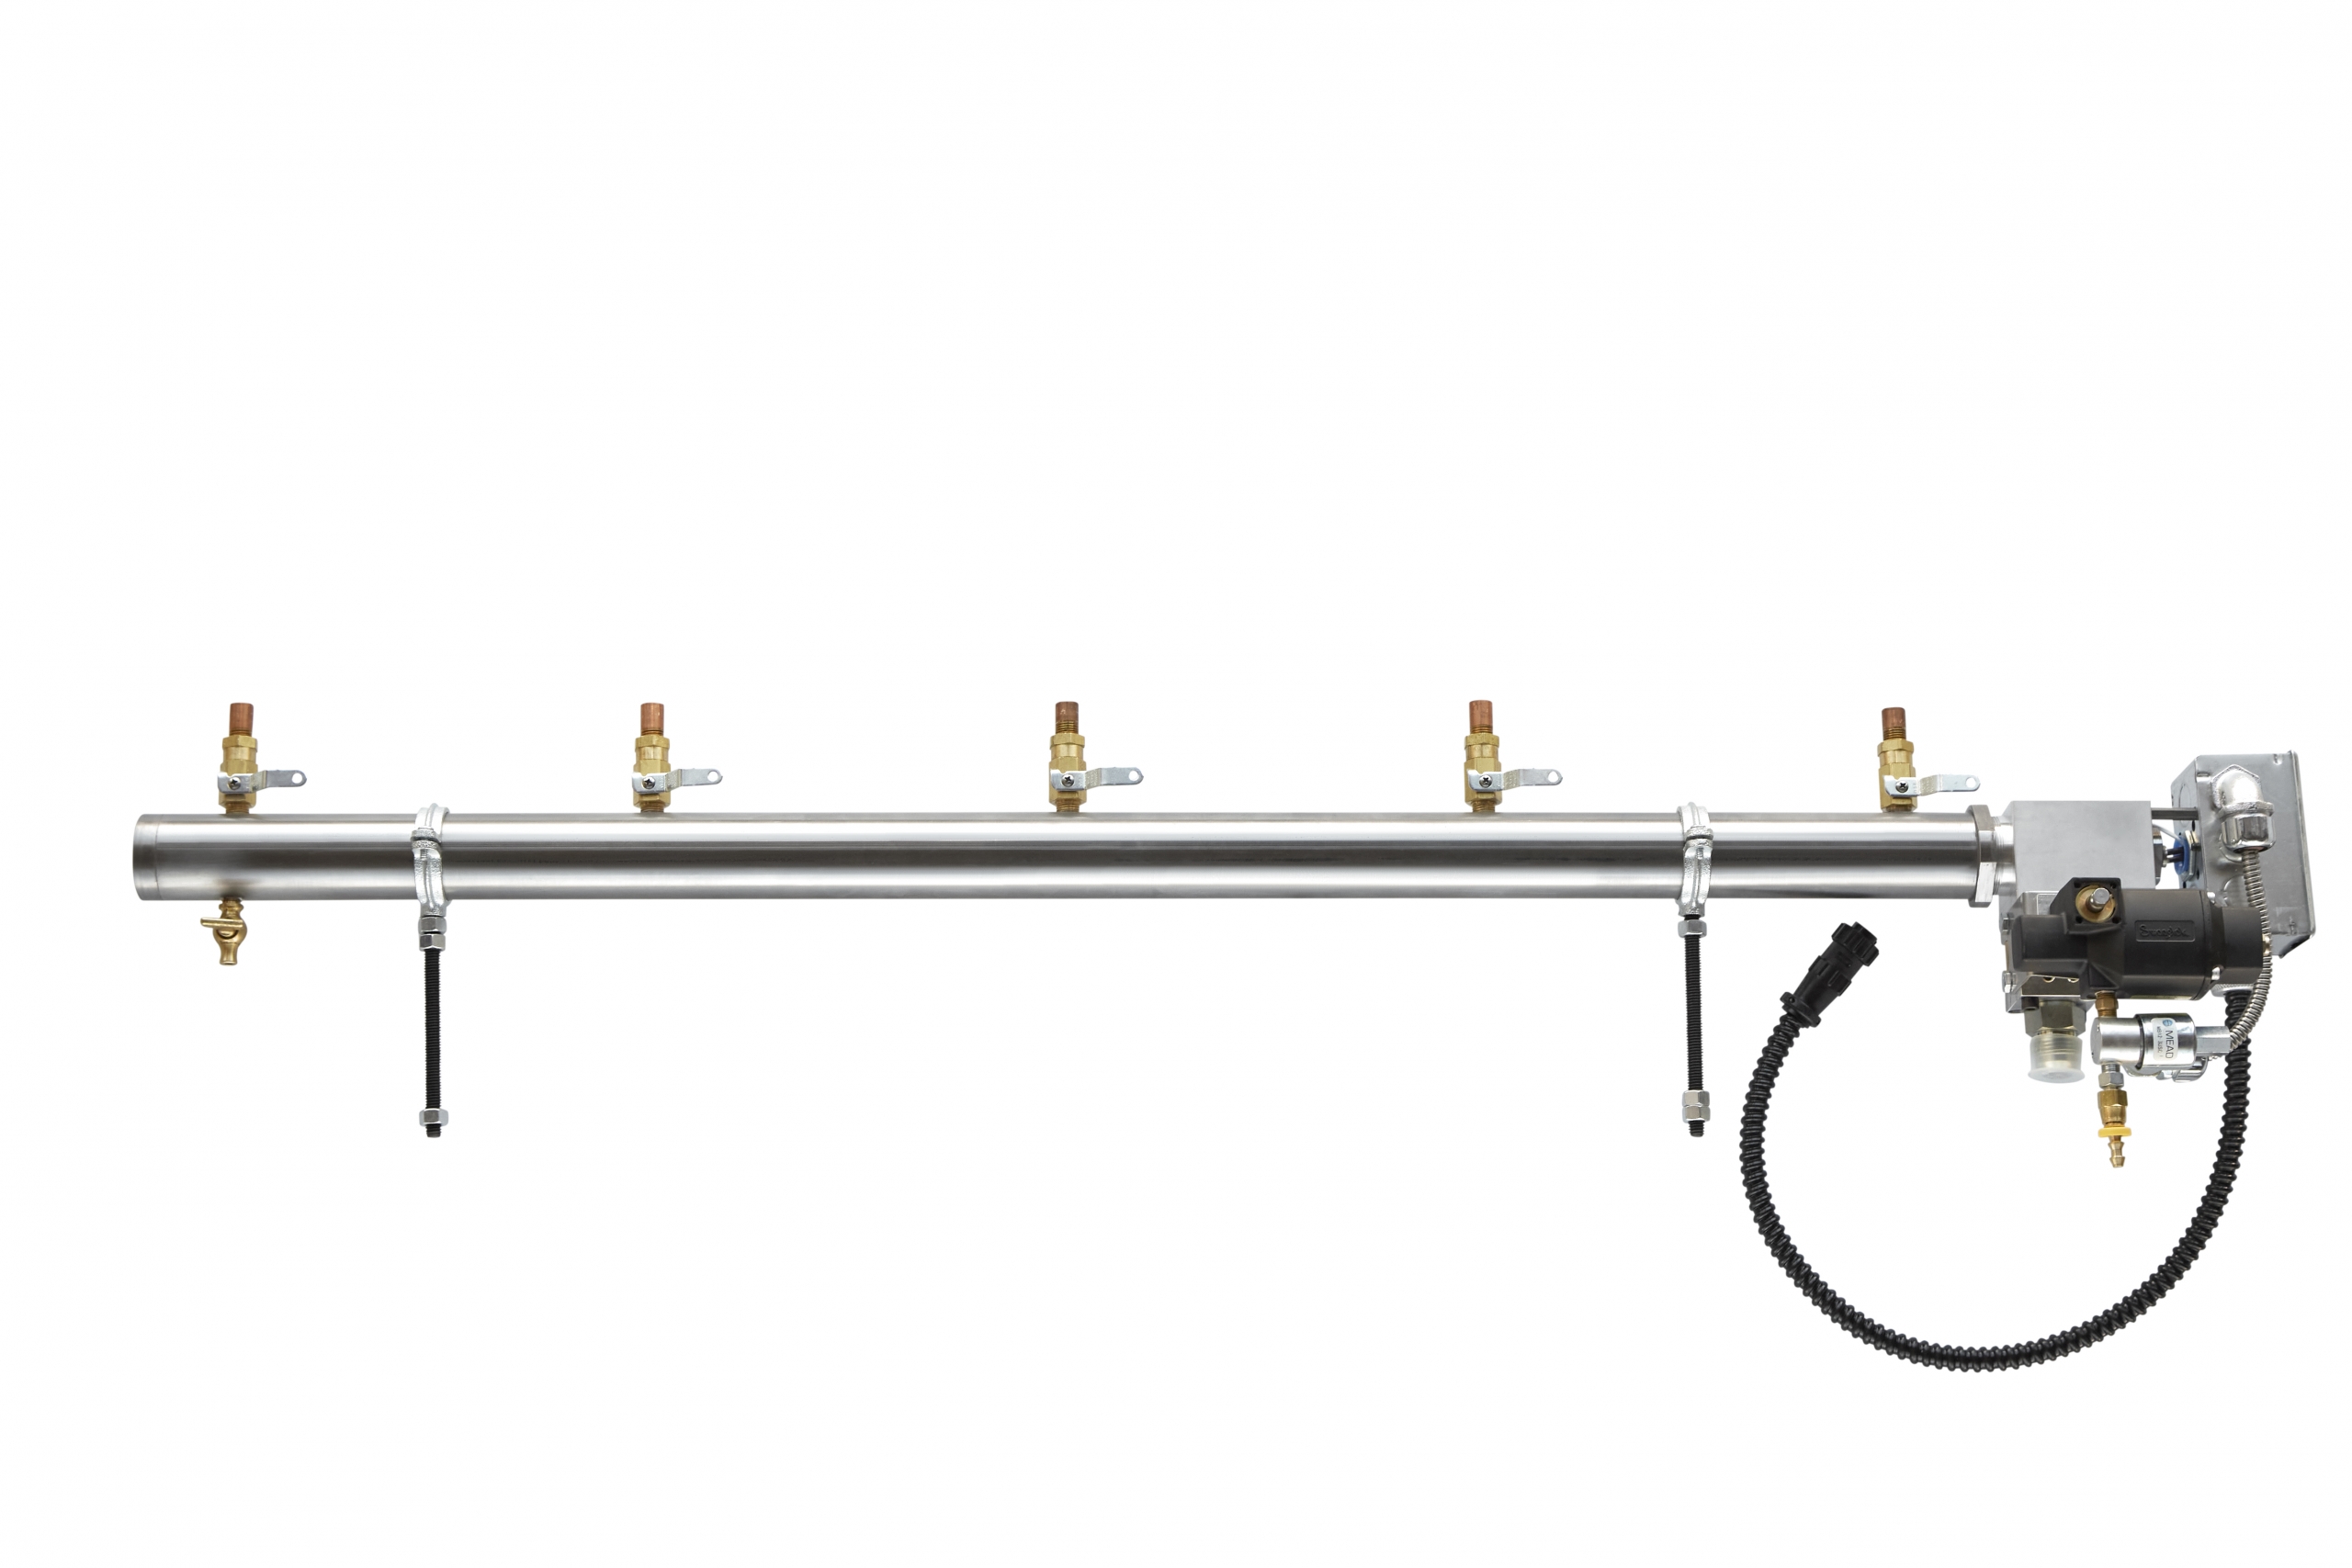 The T-Bar Manifold will evenly distribute hot melt across the width of a roll coater.